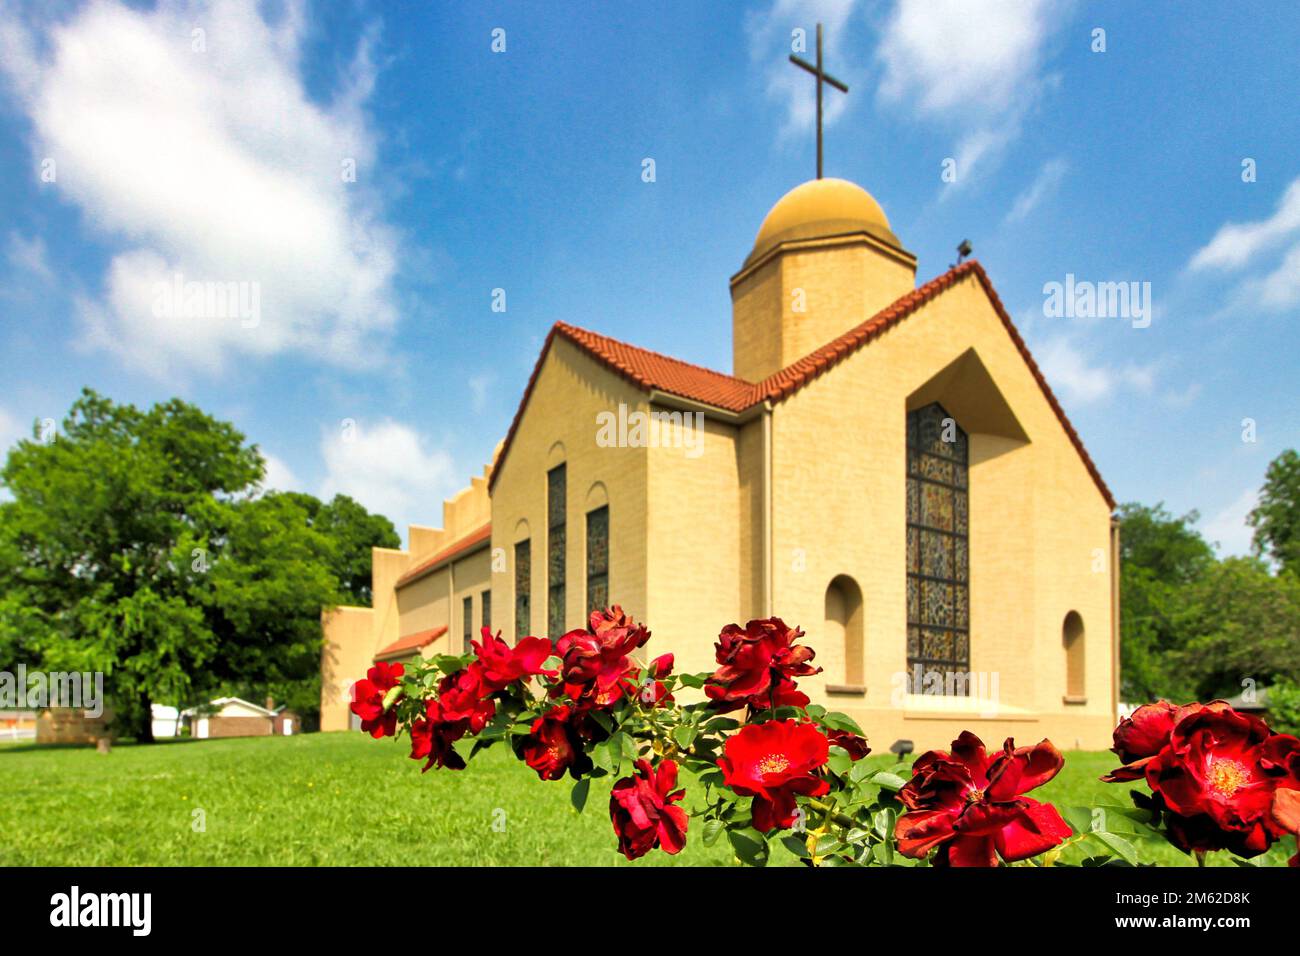 The modern Mission Revival style Good Shepherd Catholic Mission church in Marietta Oklahoma with a branch of red roses in front. Stock Photo